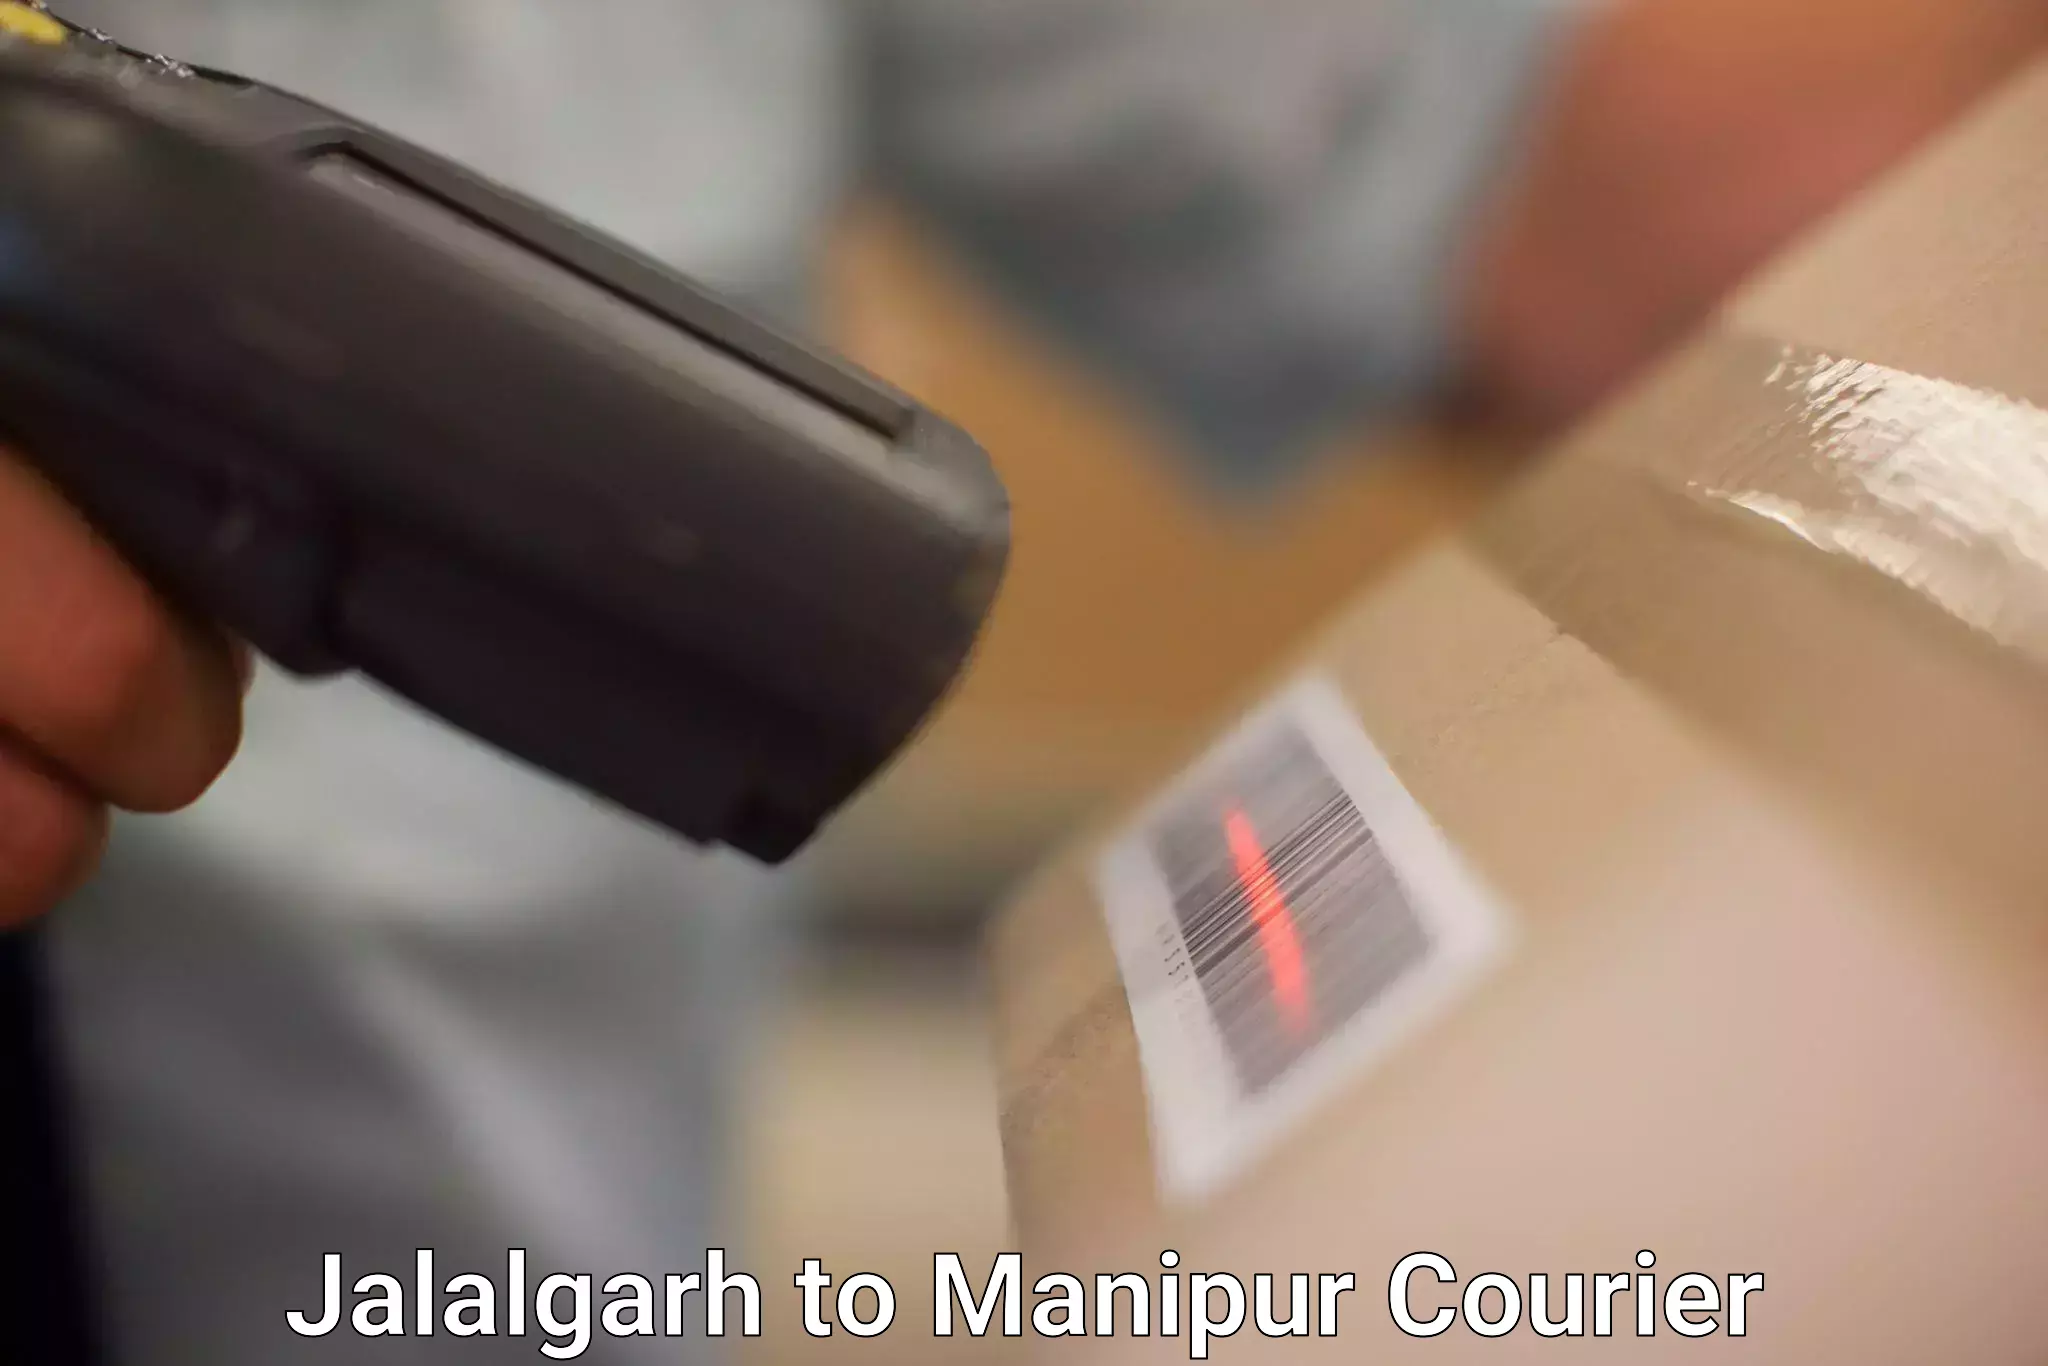 Express delivery network in Jalalgarh to Manipur